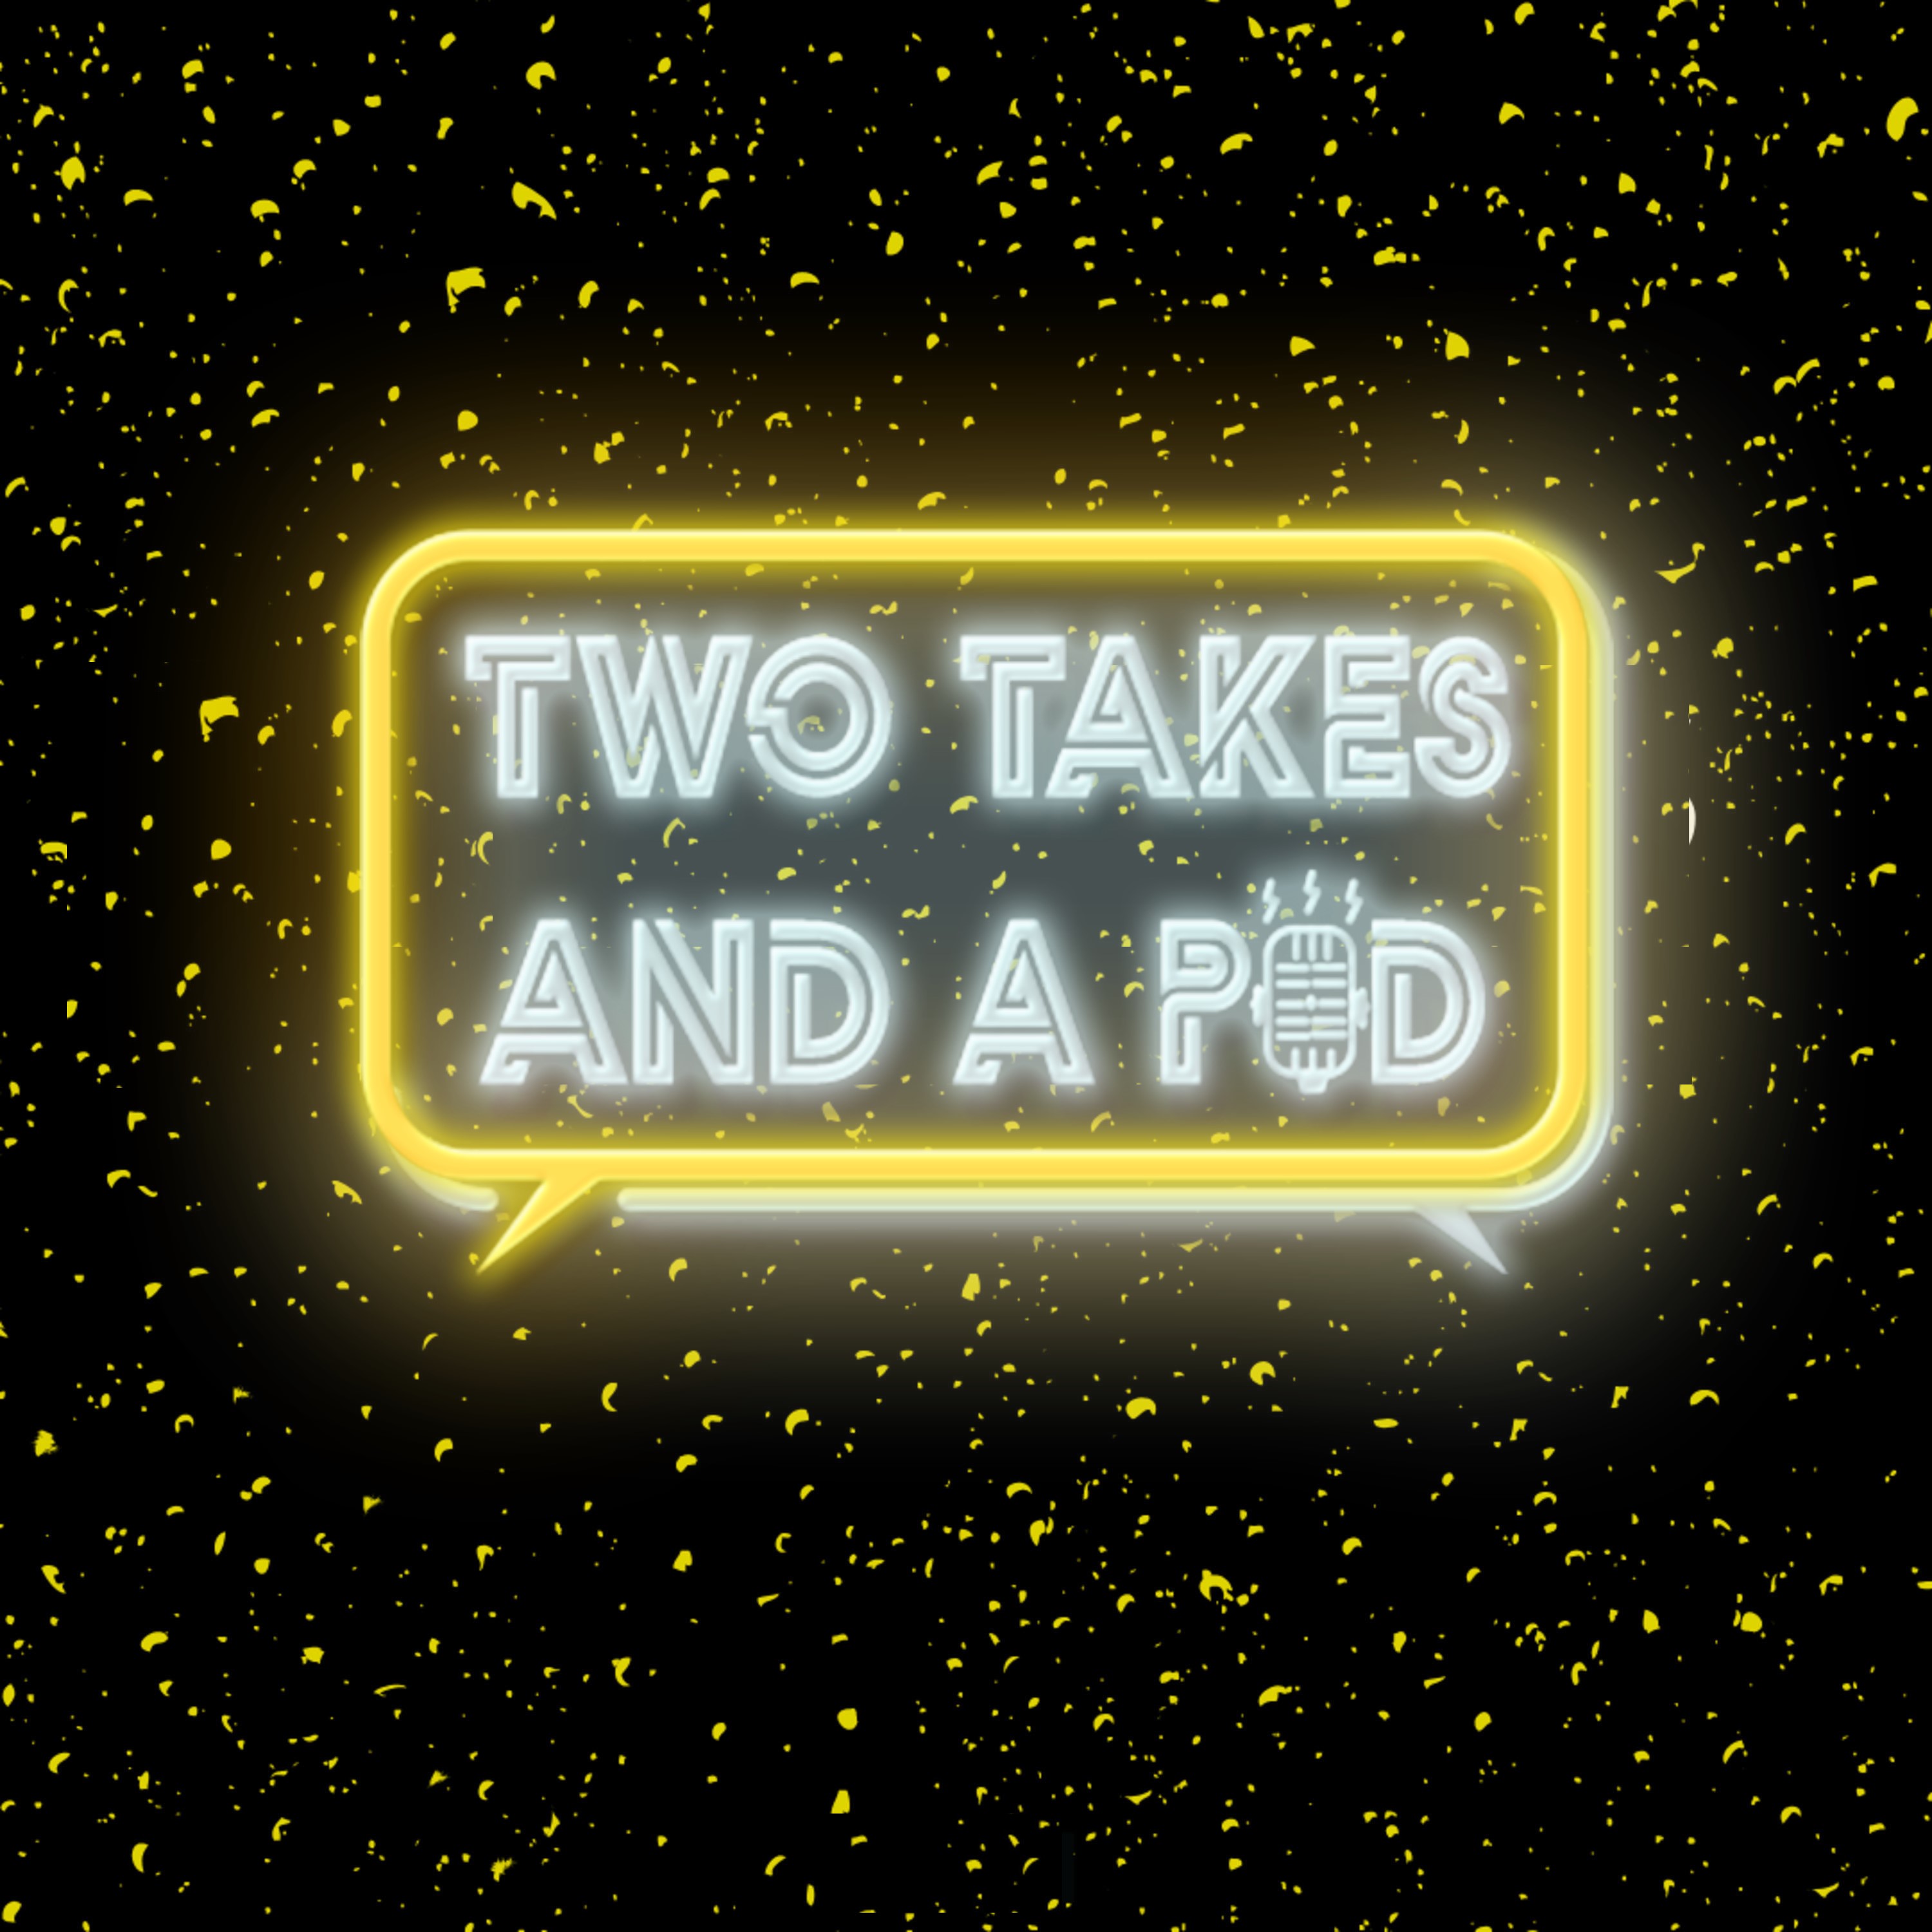 Artwork for Two Takes and a Pod